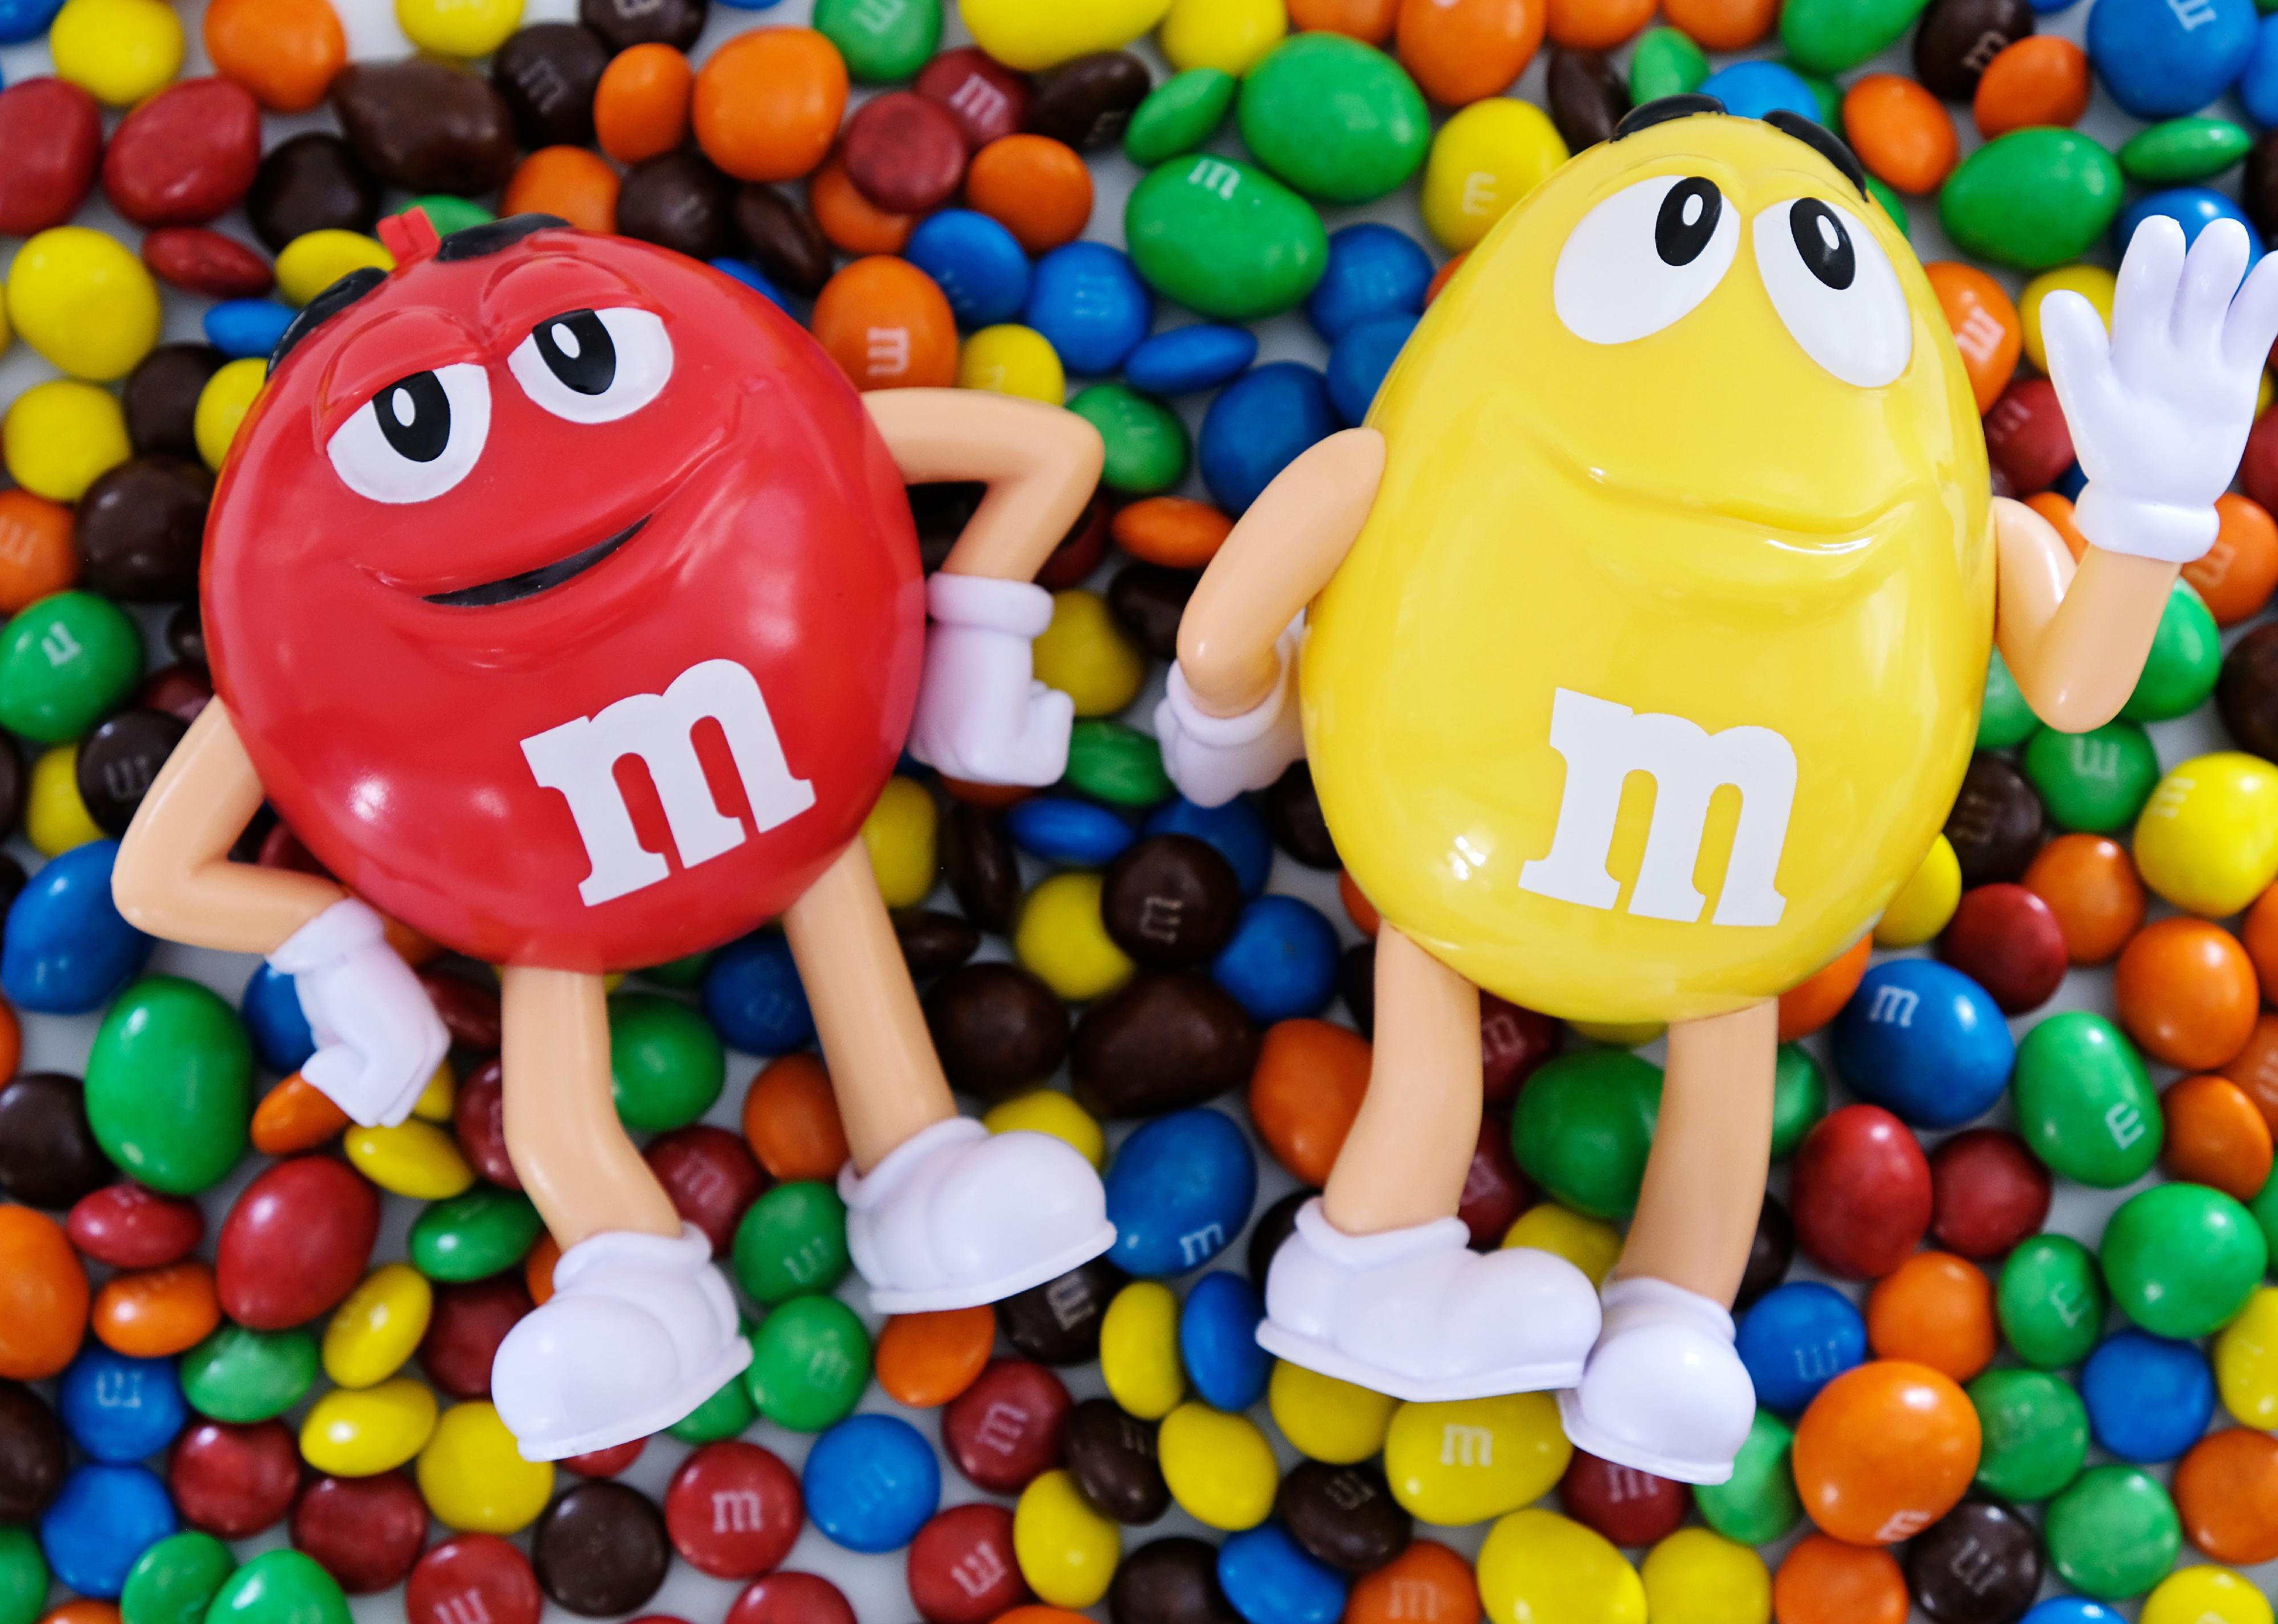 Solved Mars Inc. claims that they produce M&Ms with the